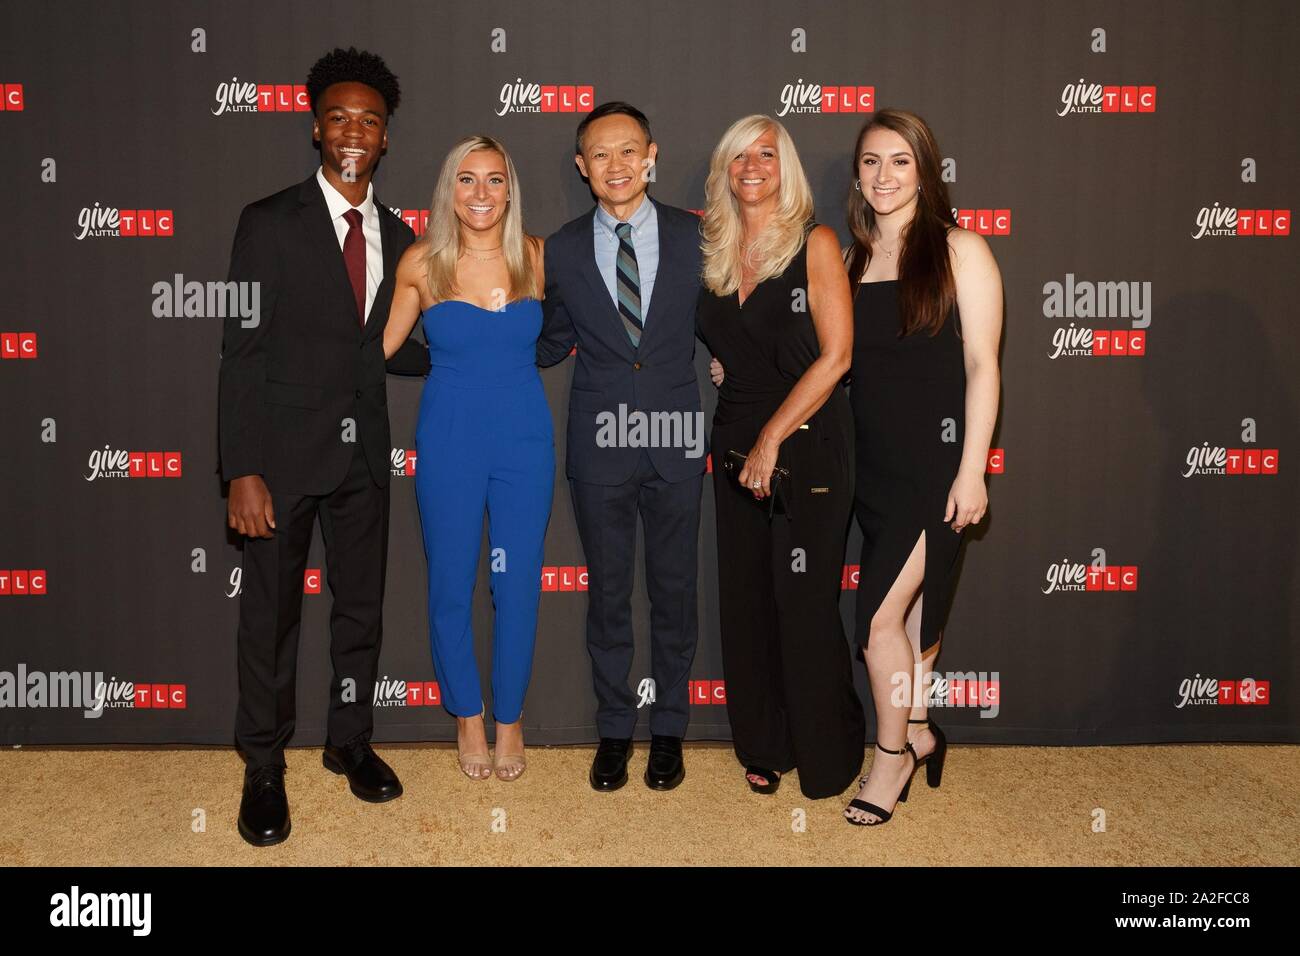 New York, NY, USA. 2nd Oct, 2019. Devin Moore, Angela Varney, Howard Lee, Barbara Buckley, Christina Varney at arrivals for TLC GIVE A LITTLE Awards, Union Park Events, New York, NY October 2, 2019. Credit: Jason Smith/Everett Collection/Alamy Live News Stock Photo